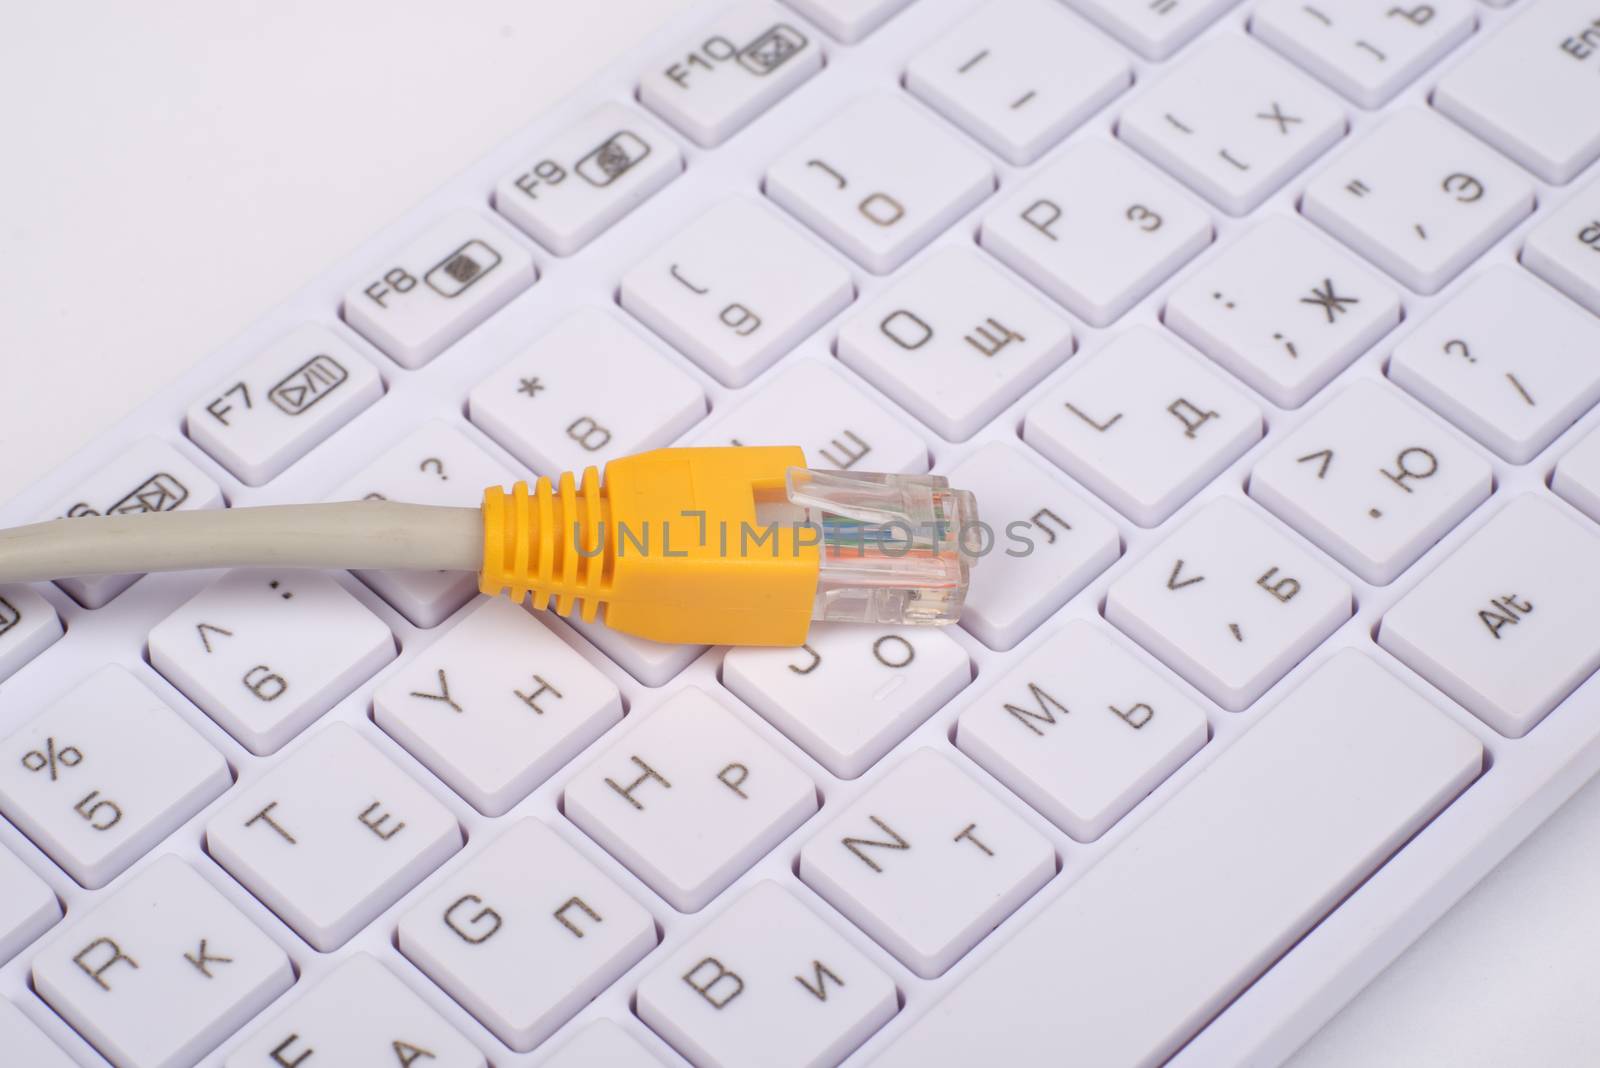 Computer keyboard with yellow cable, top view